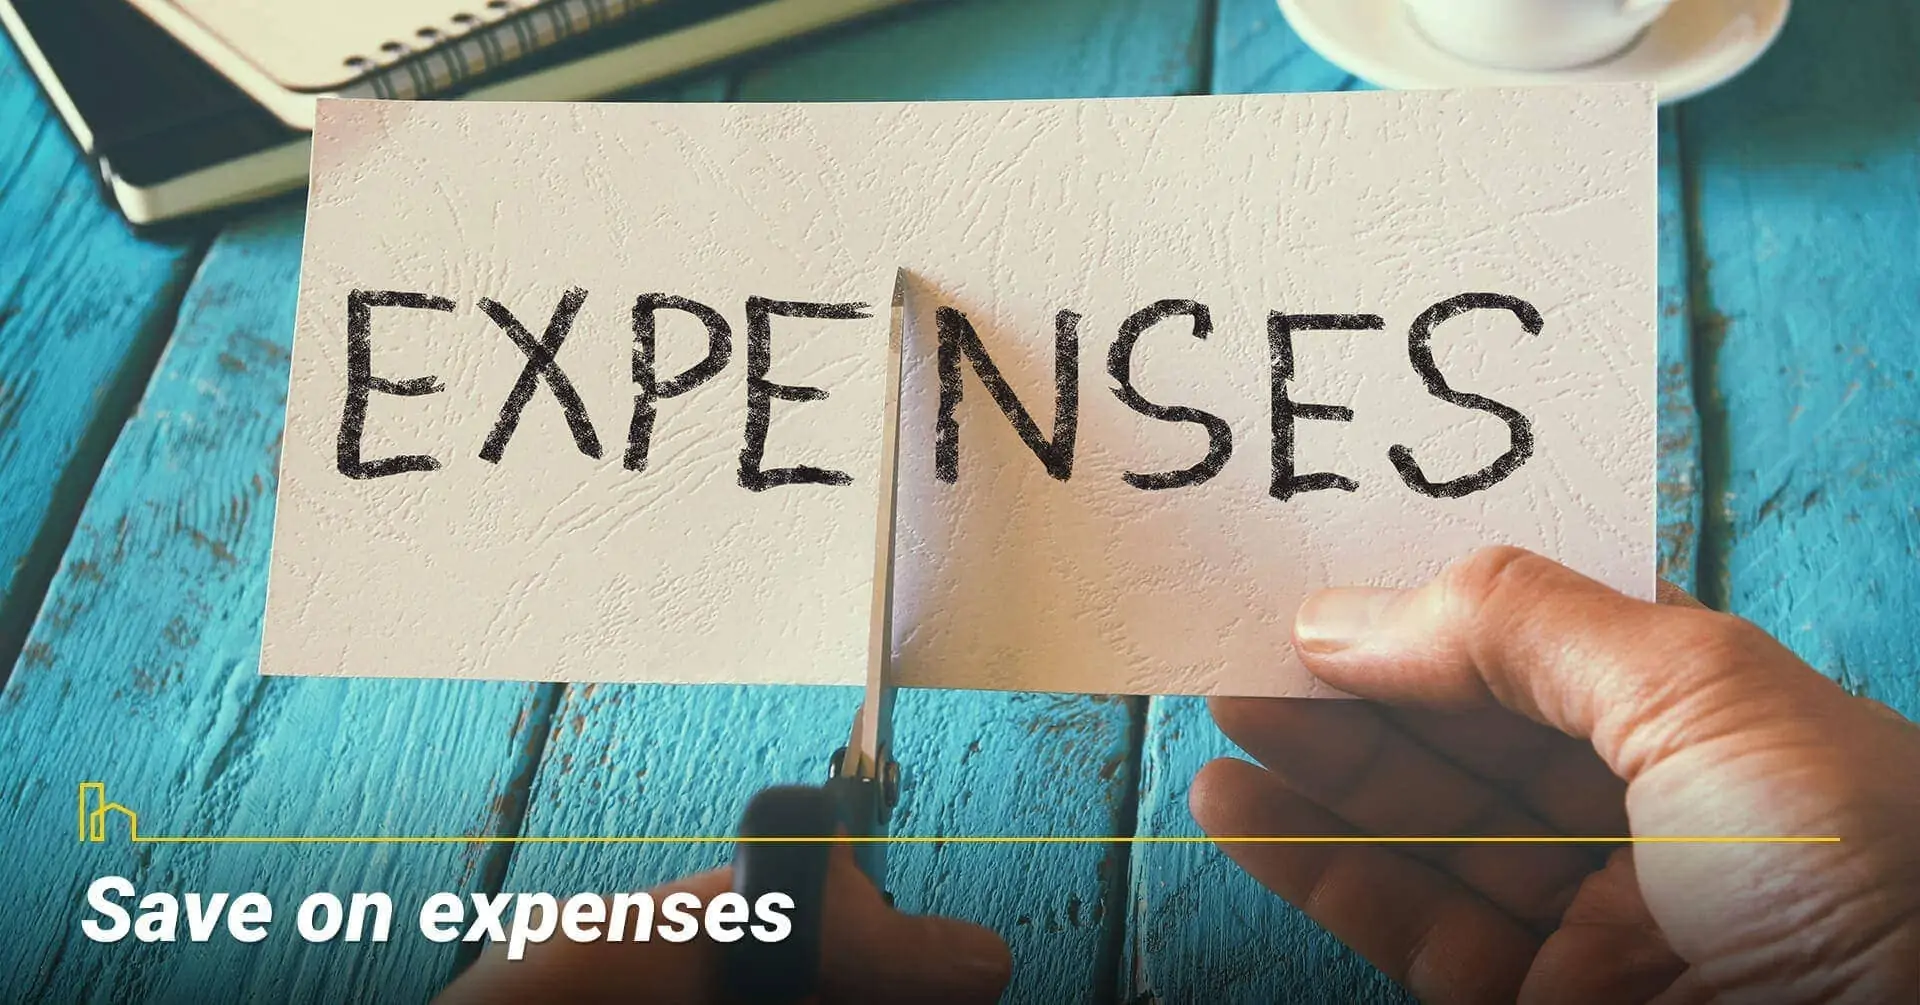 Save on expenses, reduce spending